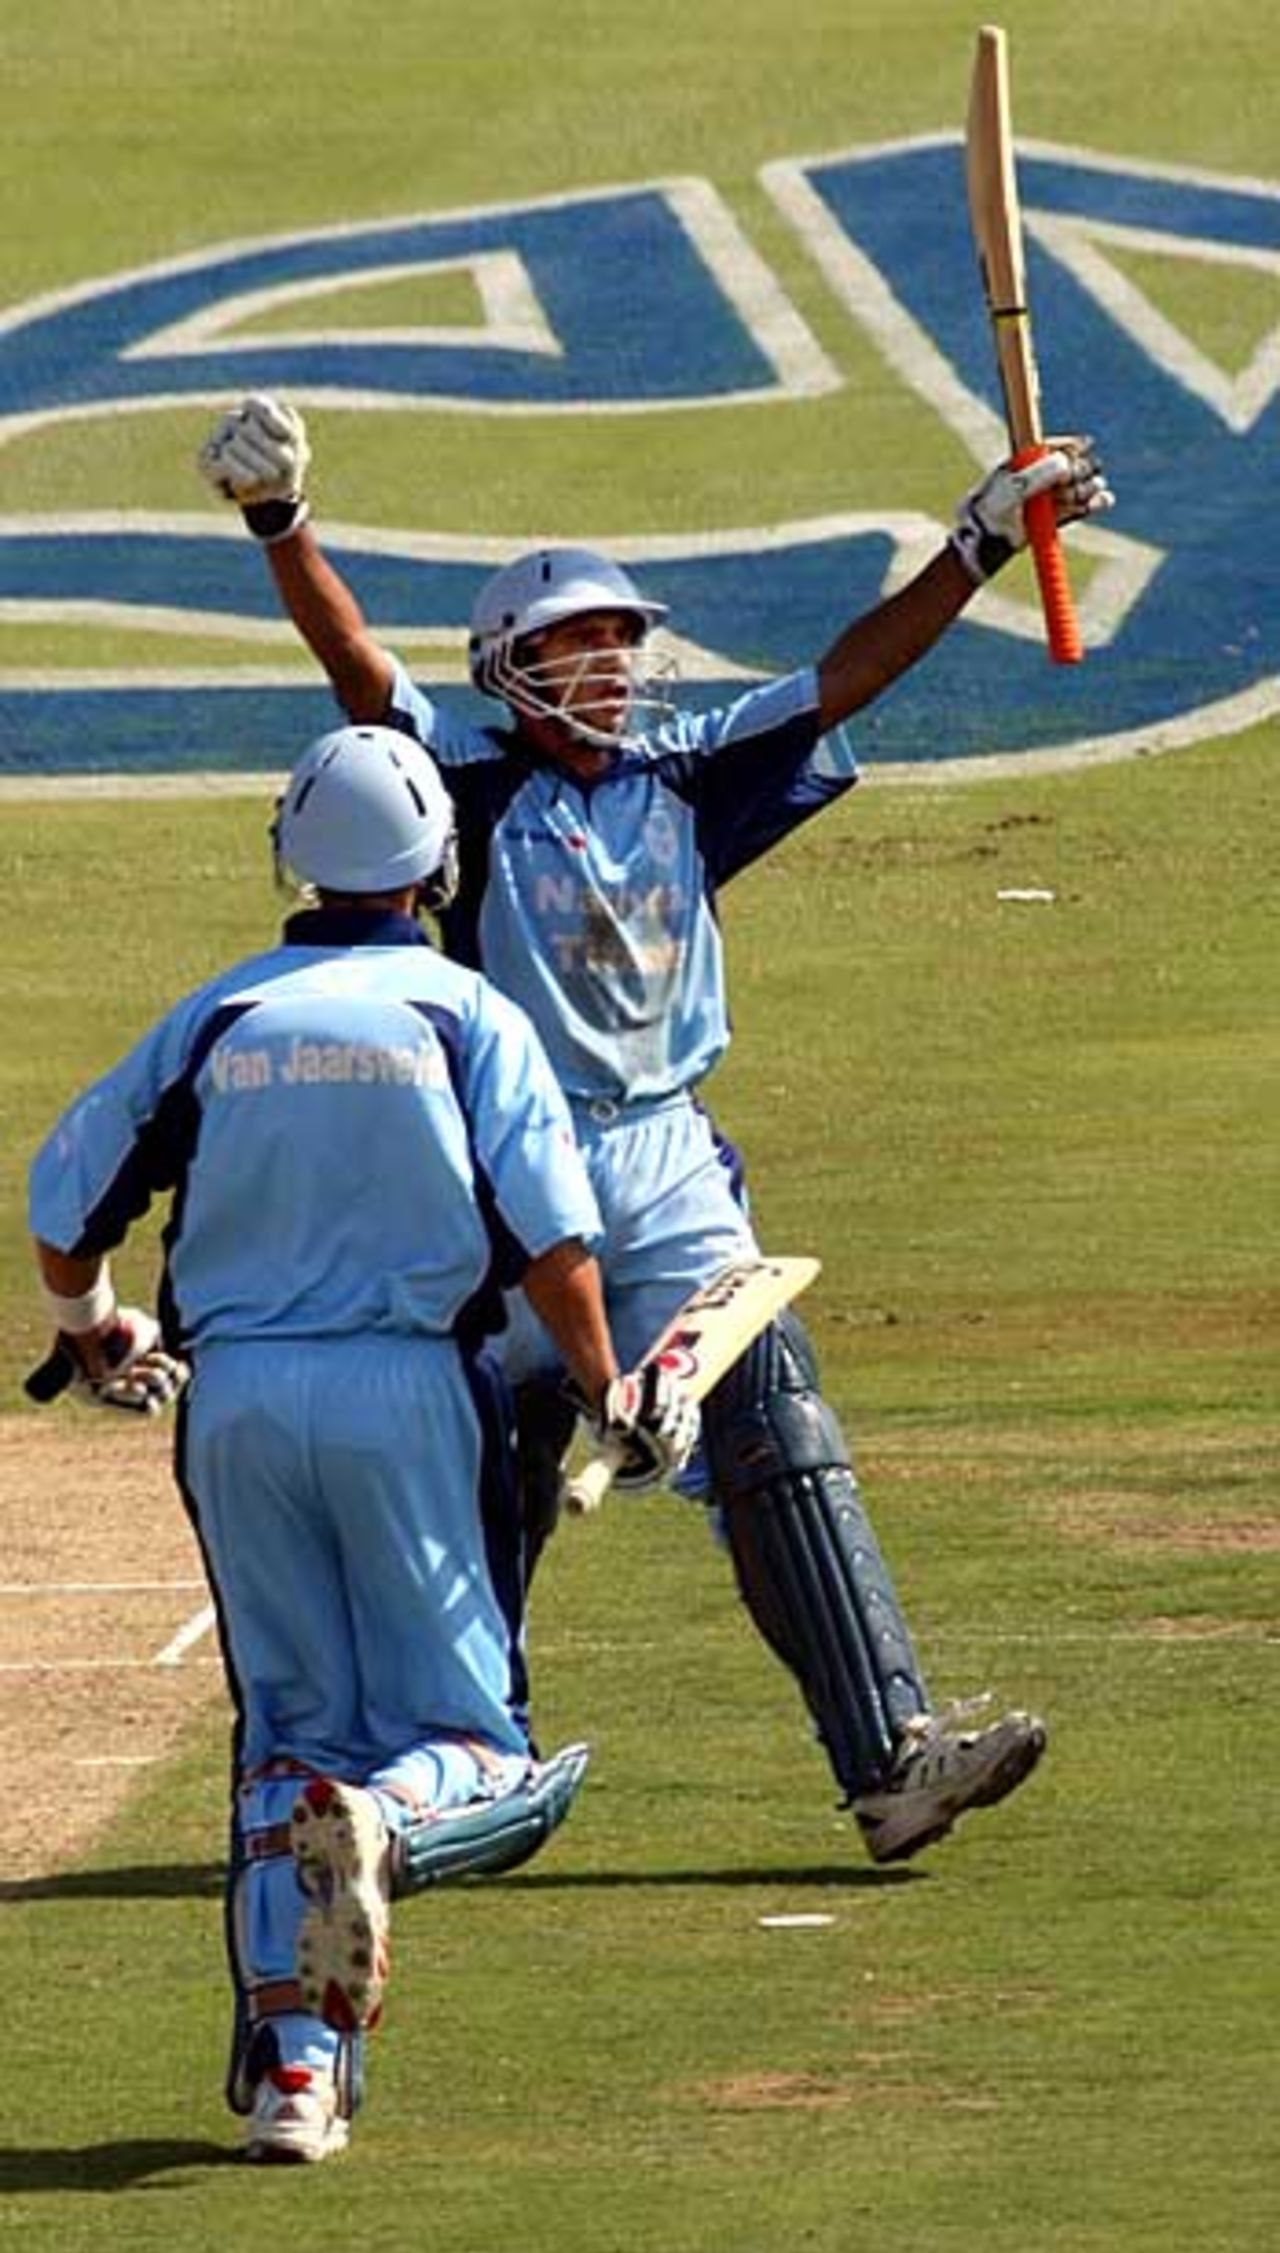 Goolam Bodi celebrates his hundred...and the victory over the Dolphins, 2nd Semi Final Standard Bank Cup, Centurion, January 8, 2005